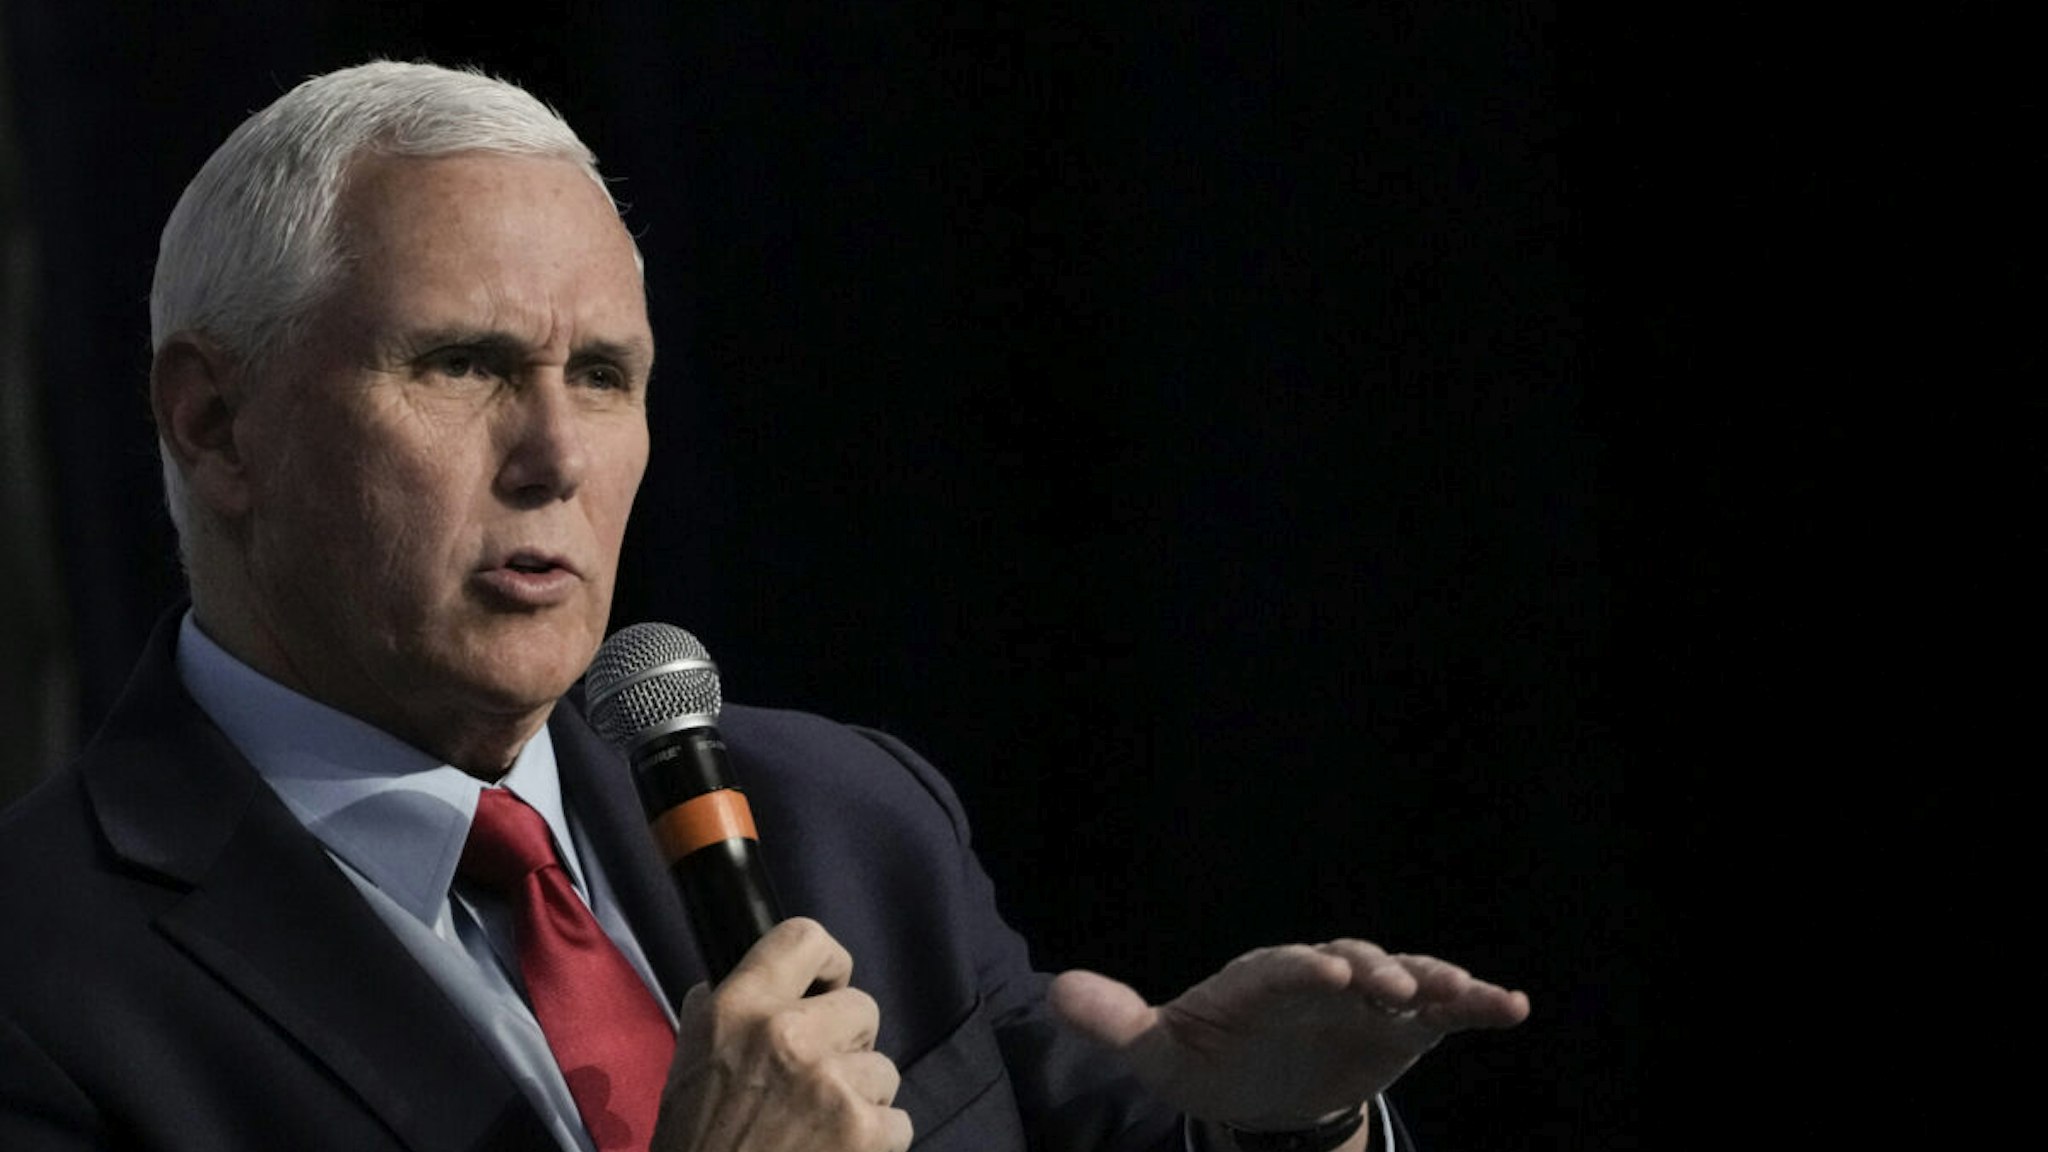 Former U.S. Vice President Mike Pence speaks at the National Review Institute's 2023 Ideas Summit March 31, 2023 in Washington, DC.